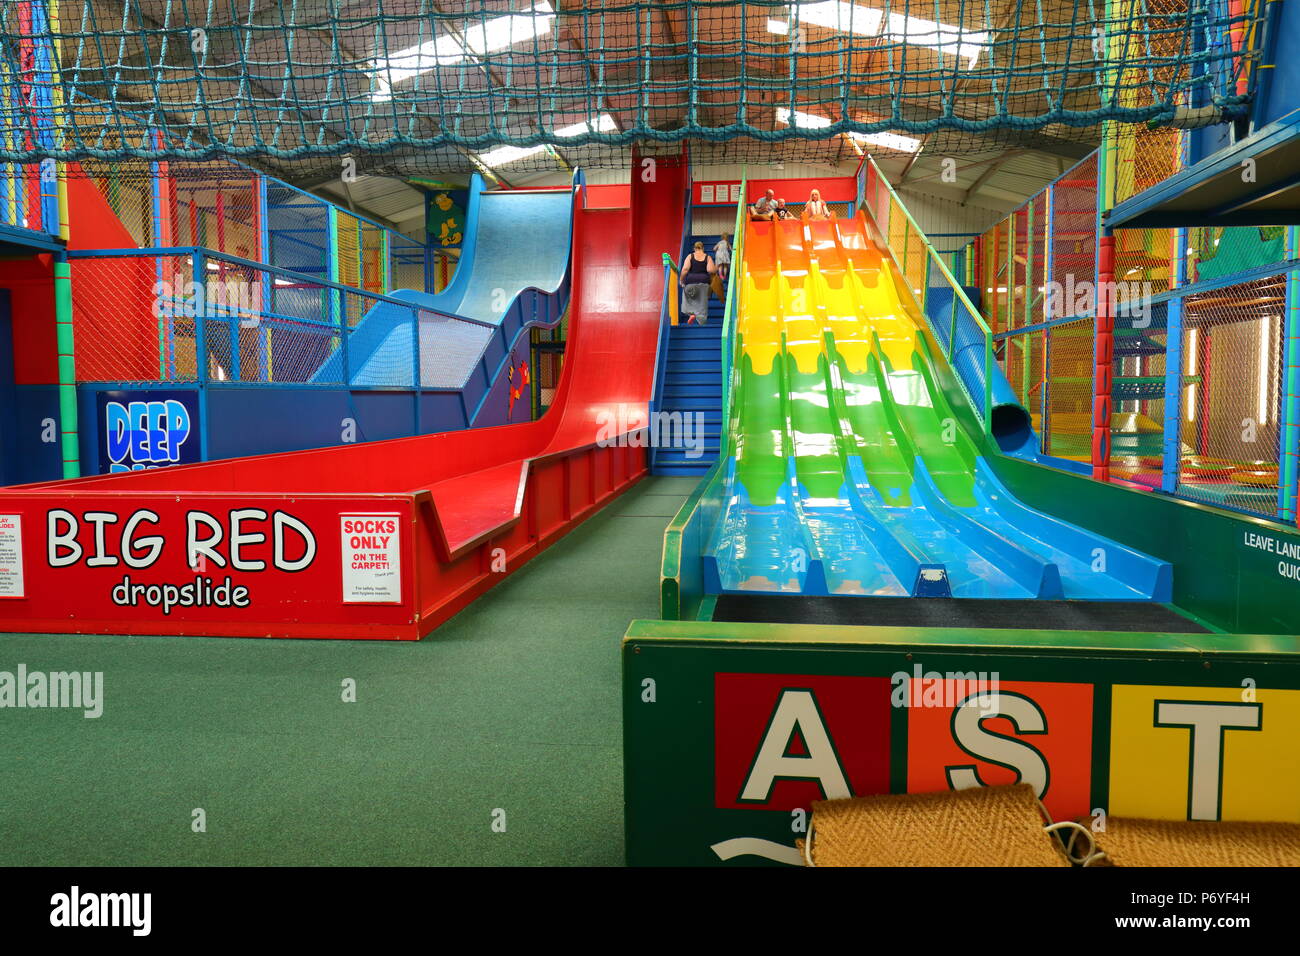 Drop slides & Astra slide based in the Jungle Barn of Paradise Park in Cornwall Stock Photo